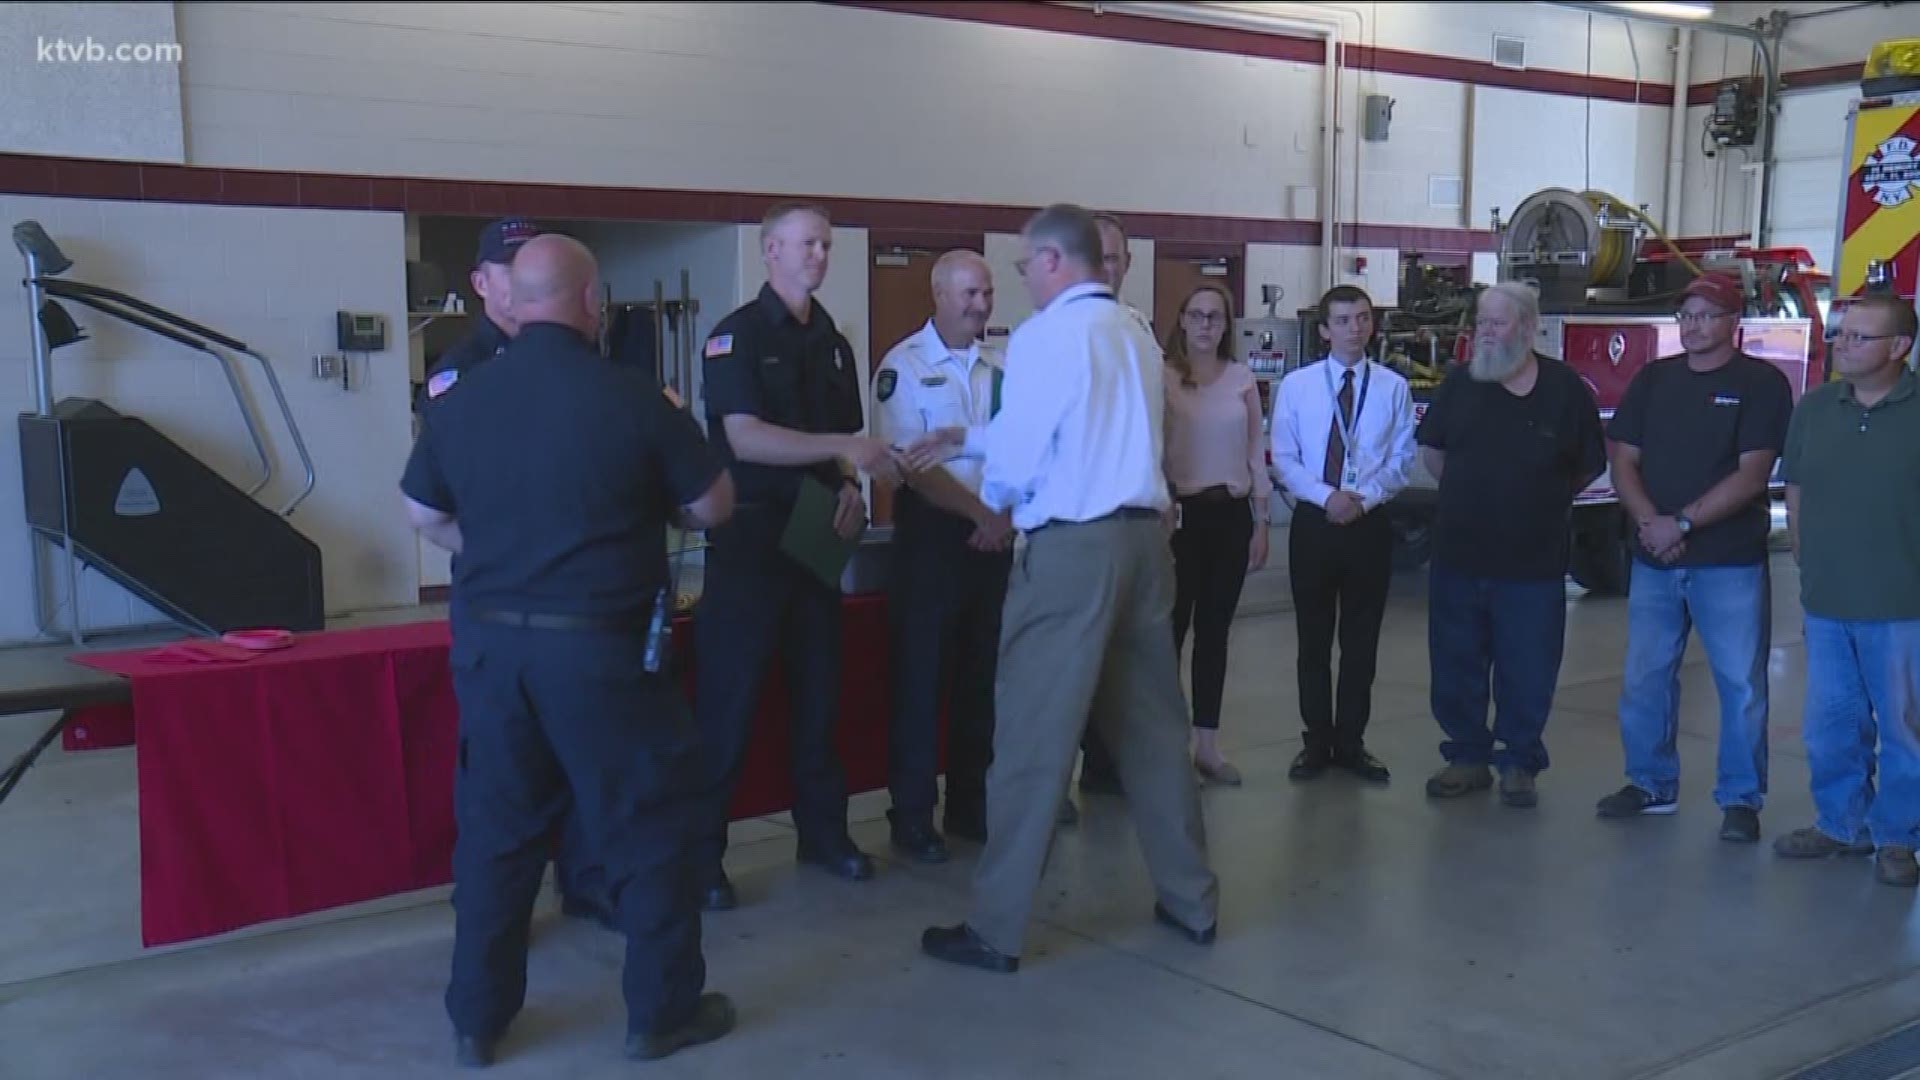 Boise Fire officials credit the man's co-workers for taking CPR training.